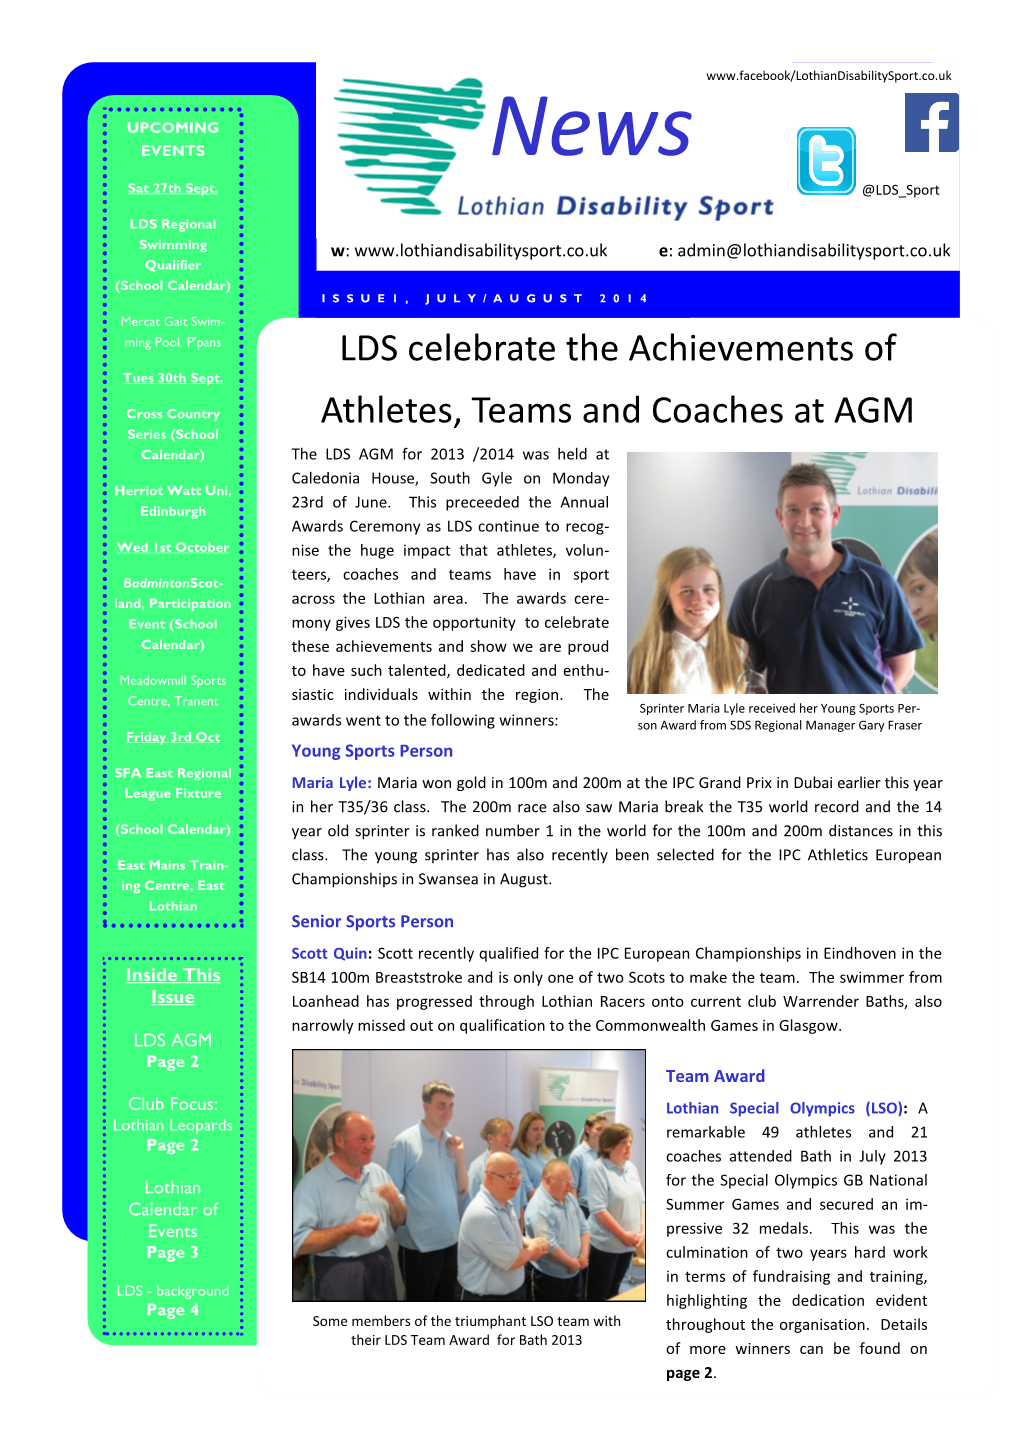 LDS Celebrate the Achievements of Athletes, Teams and Coaches At